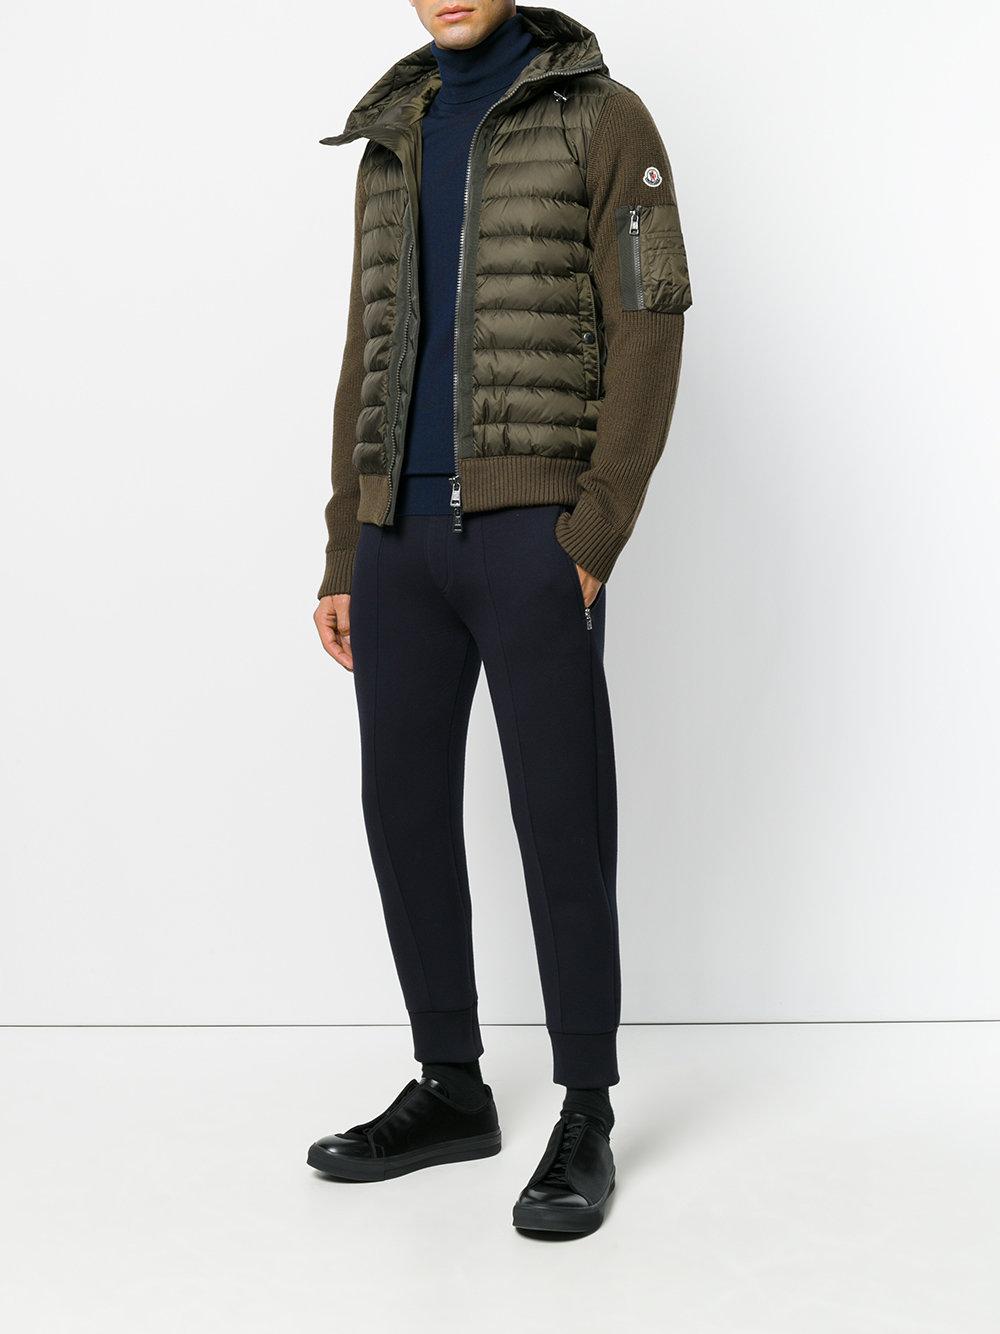 Moncler Wool Maglione Jacket in Green for Men - Lyst